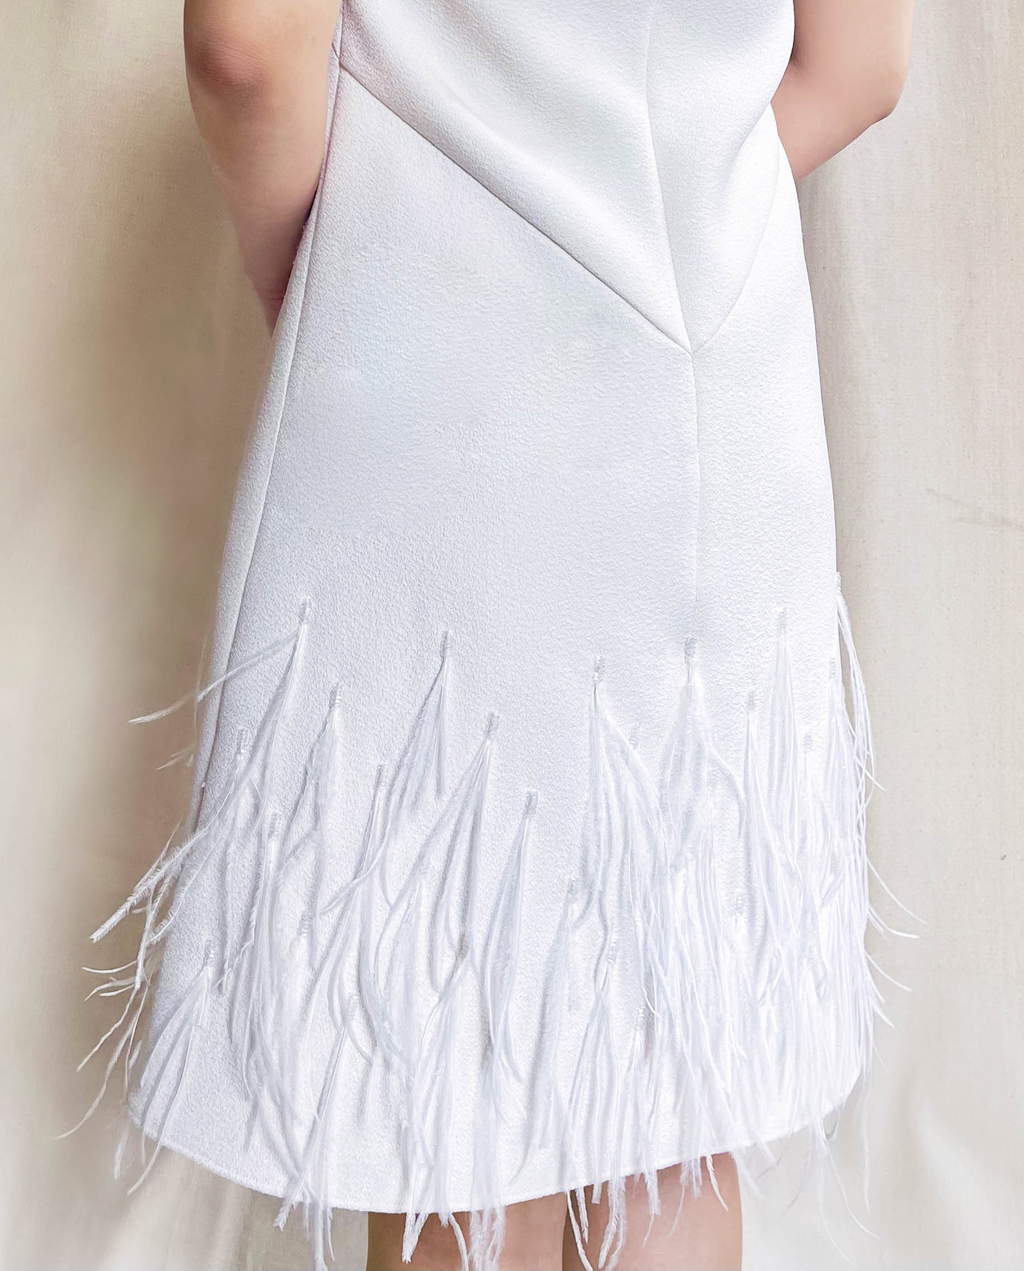 Trapeze Dress - Ivory Crepe with Feathers